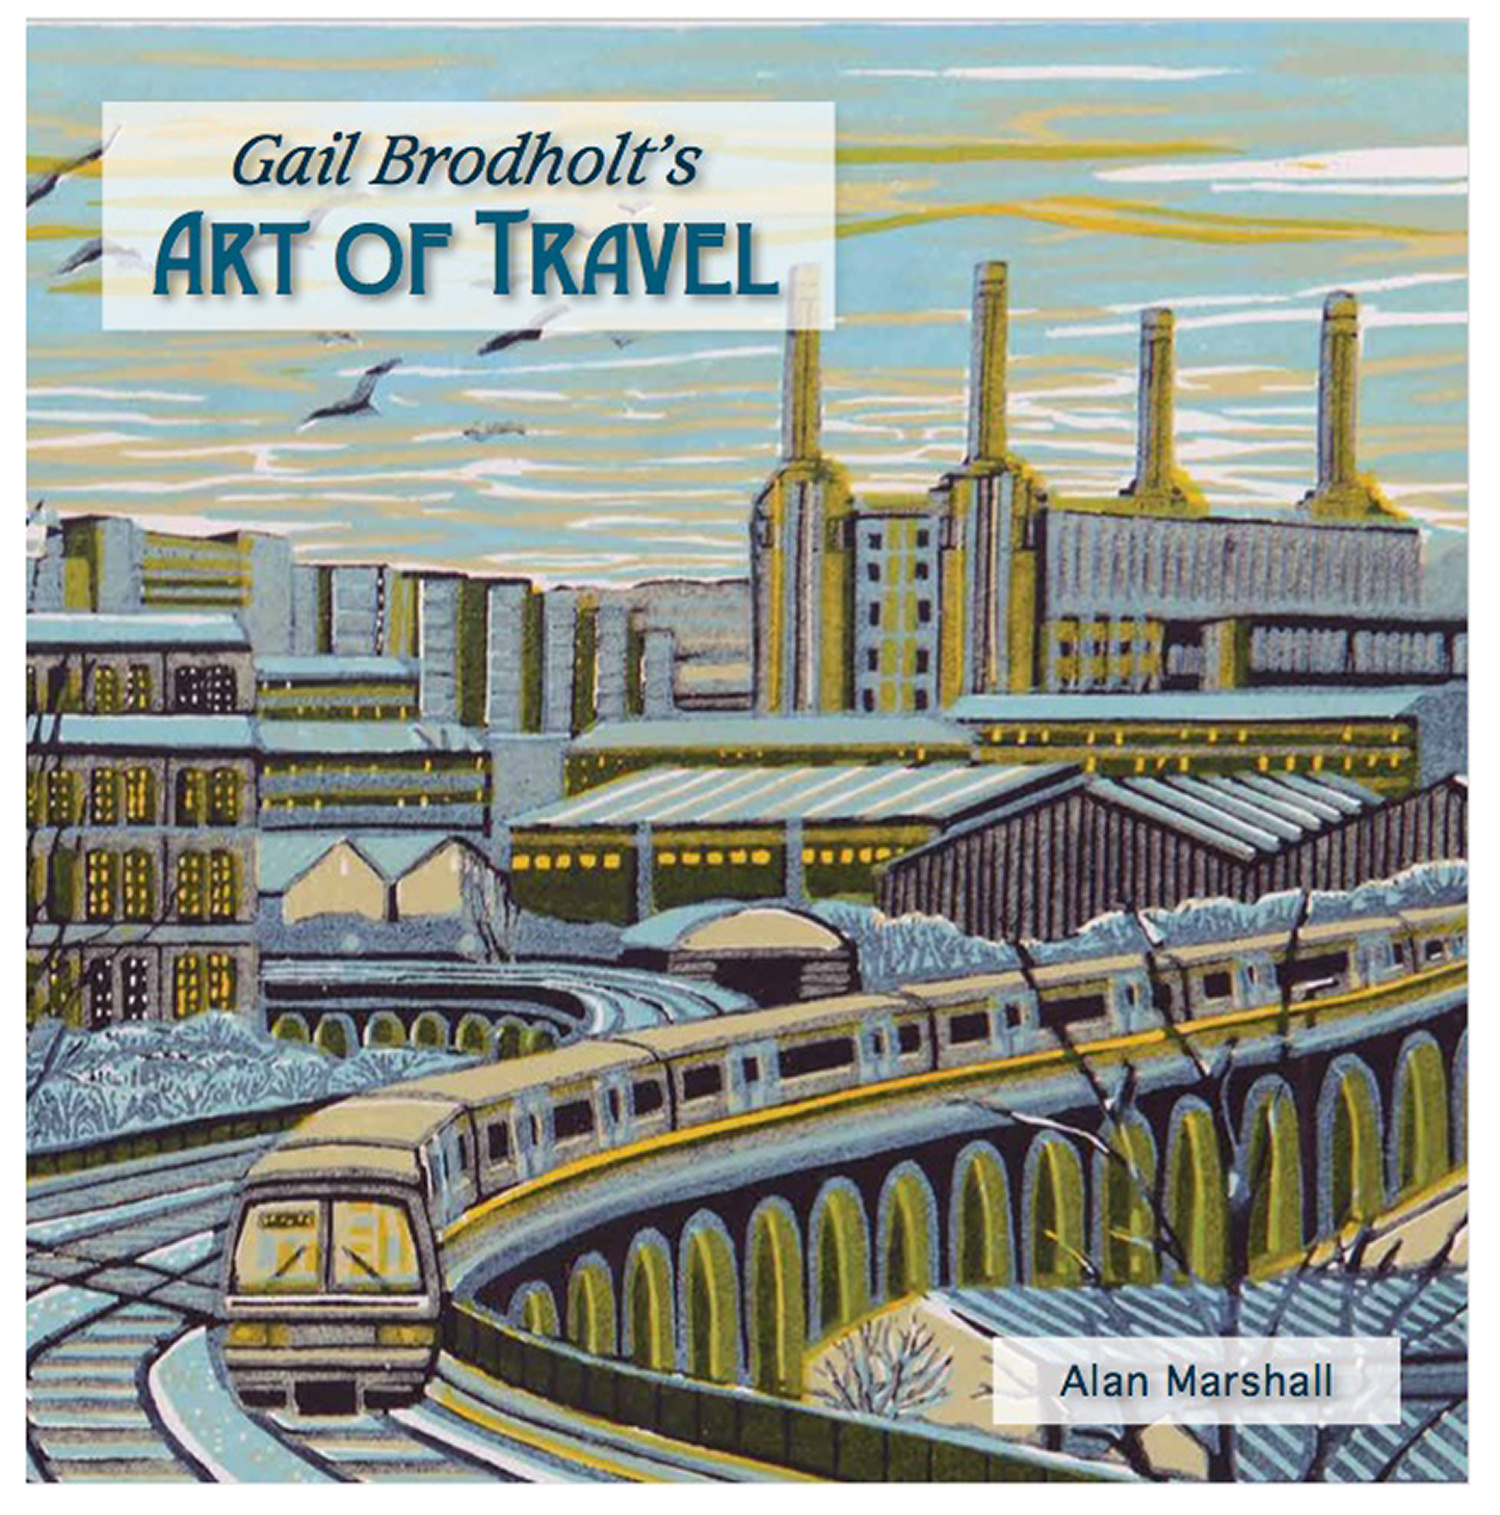 Art of Travel by Gail Brodholt